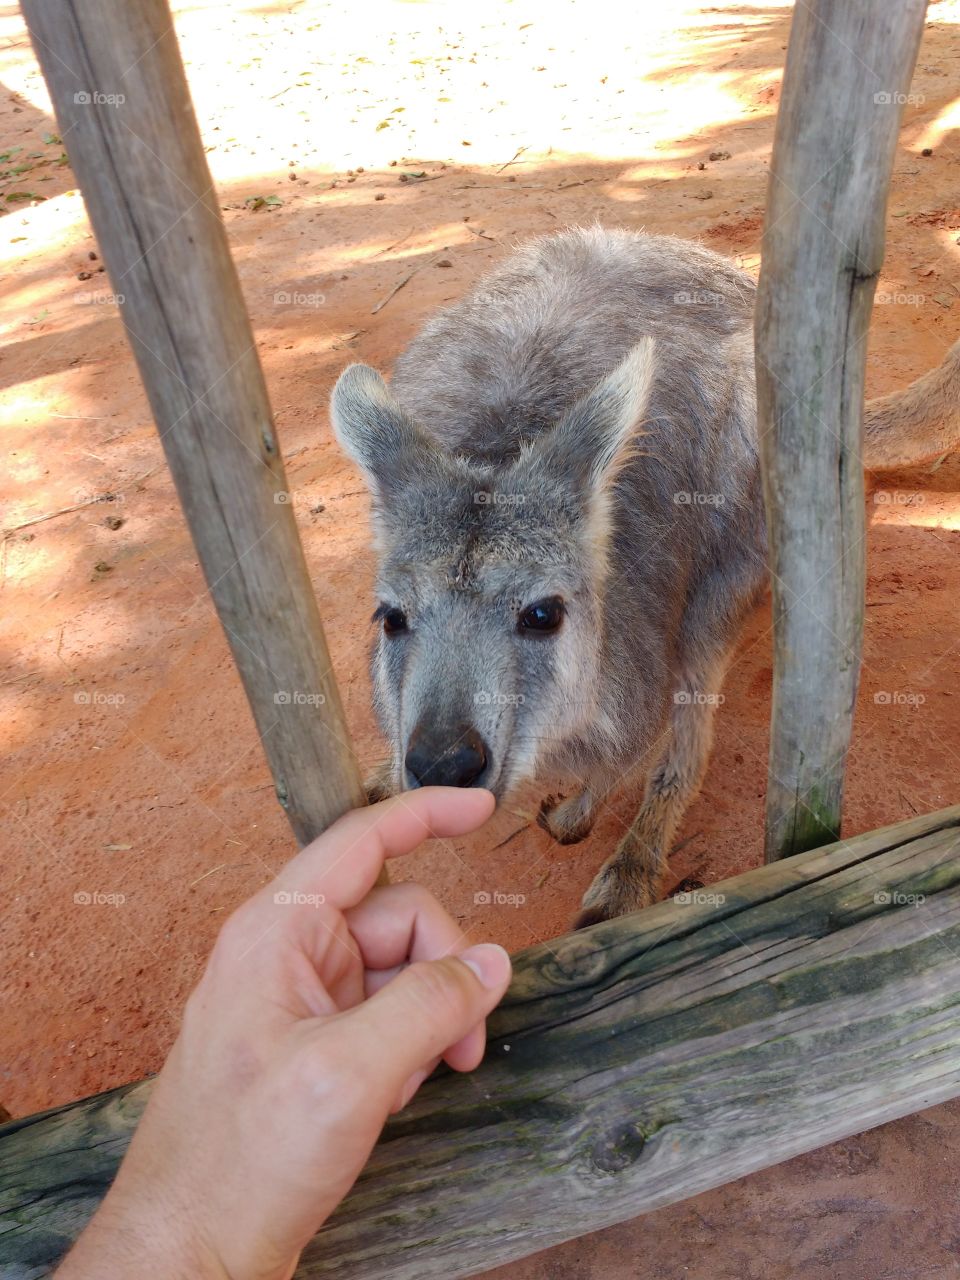 wallaby sniffing a man's finger at the Miami zoo